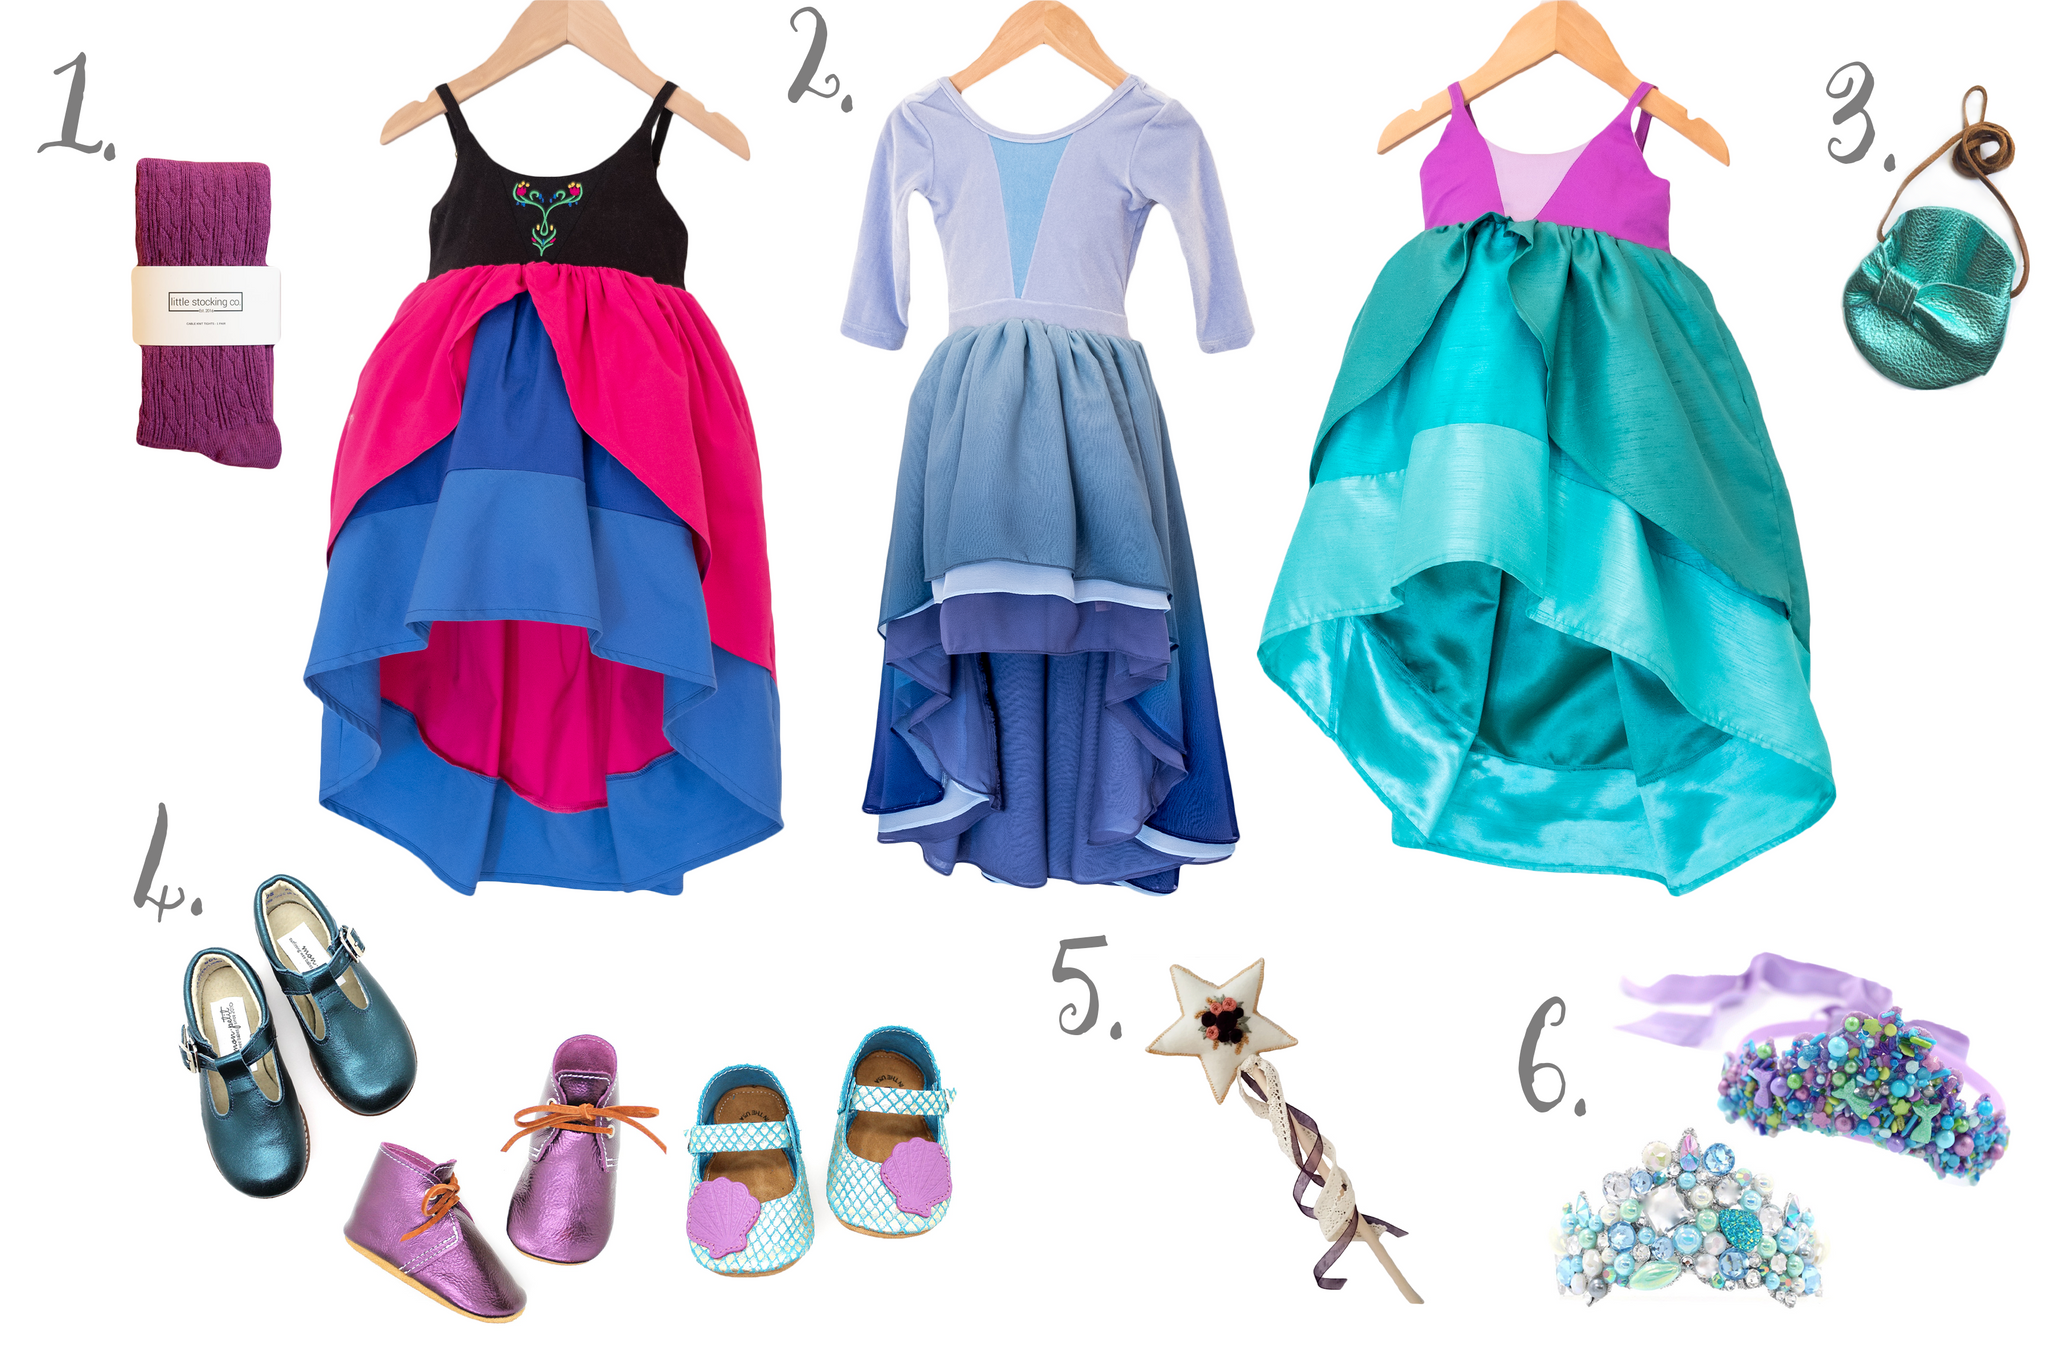 A blog collage with the princess dresses and princess accessories to go with it